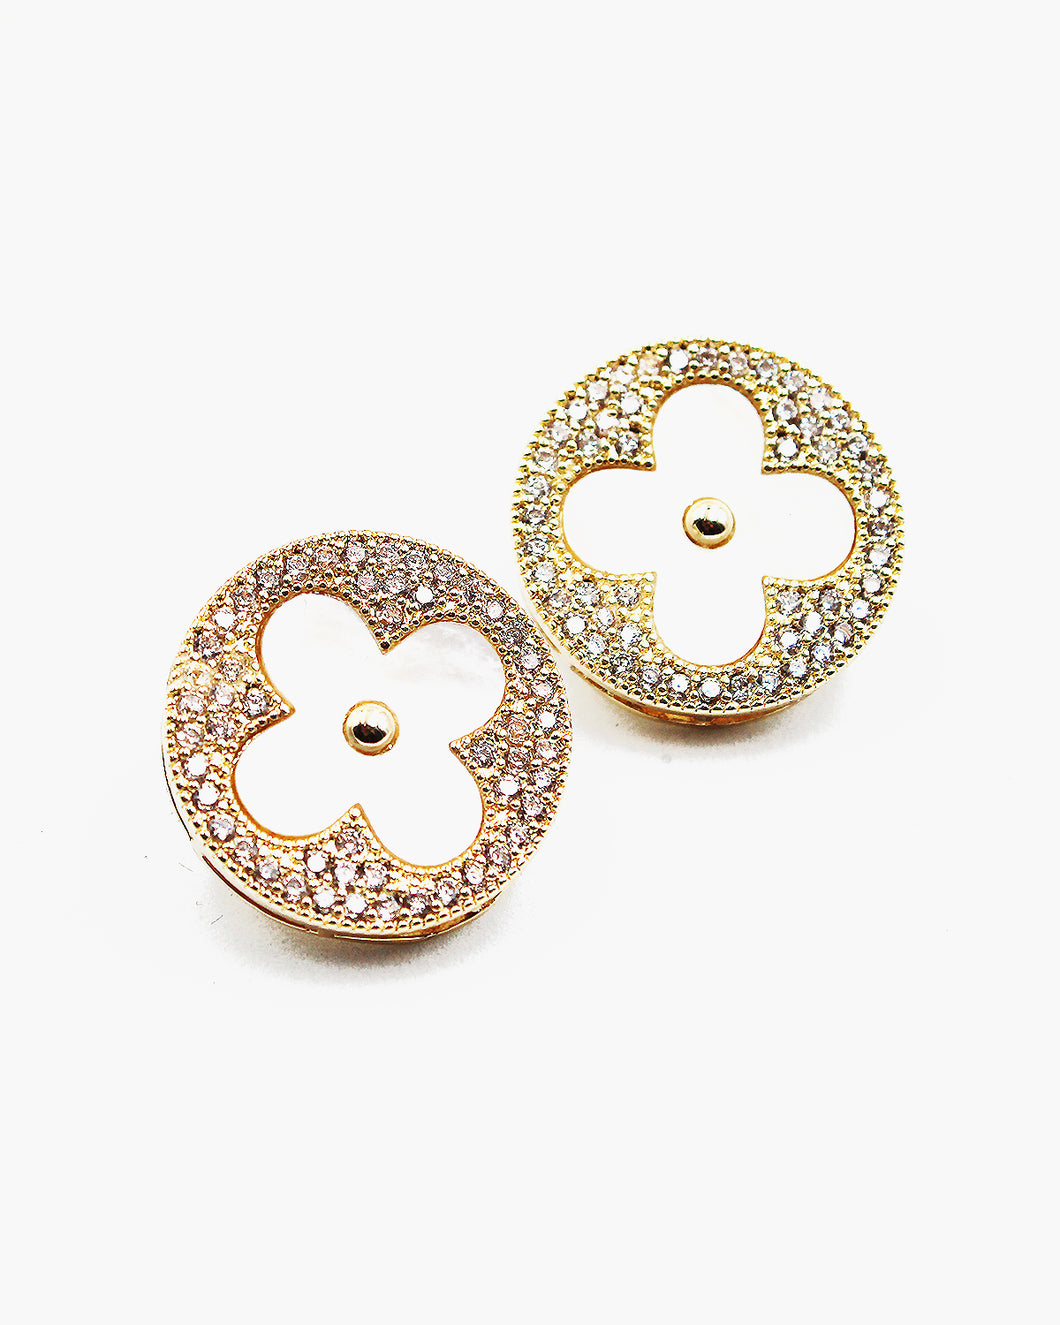 Mother of Pearl Flower on Pave Stone Earrings